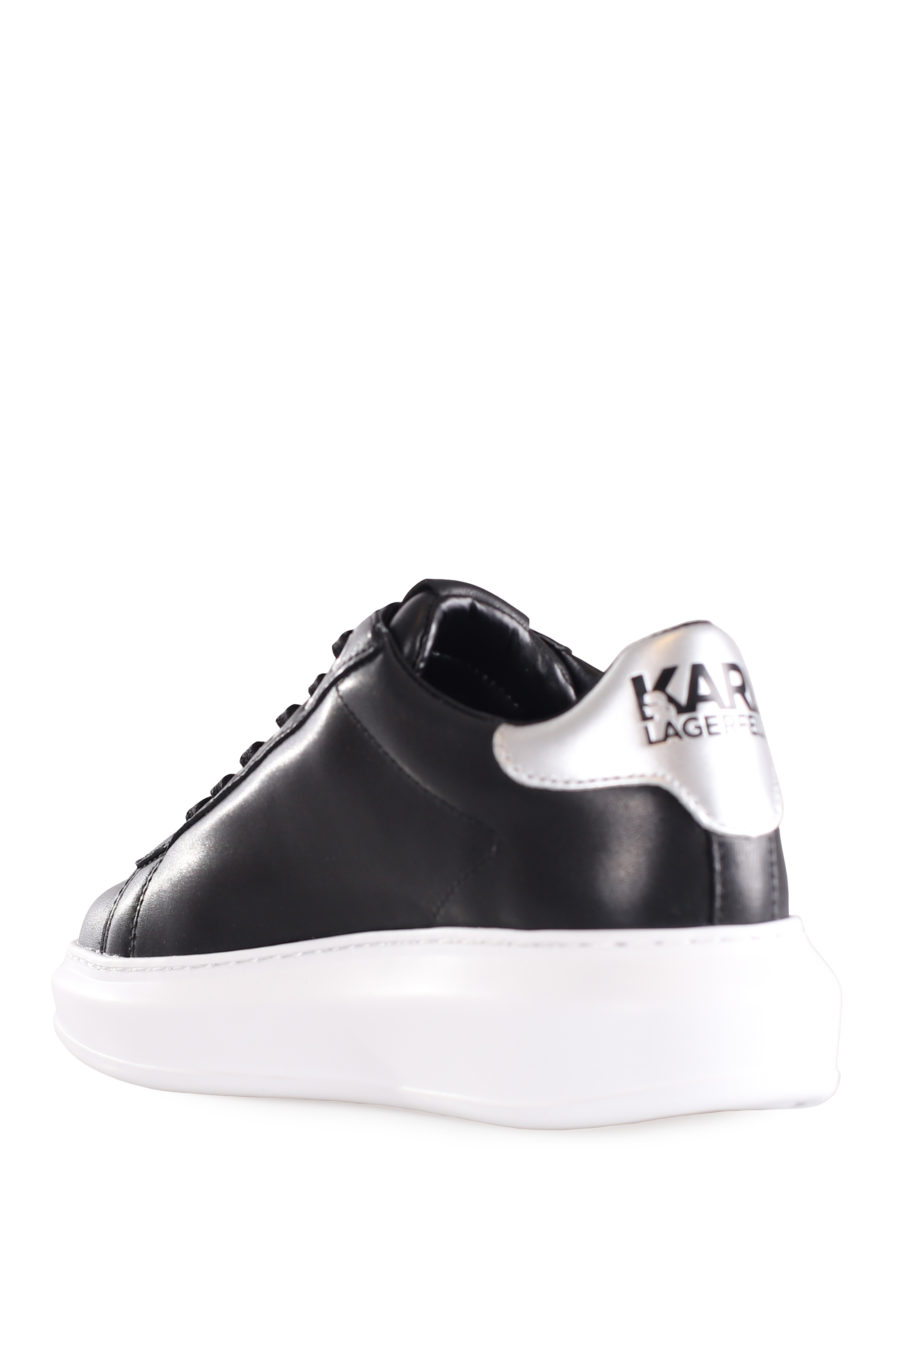 Black trainers with silver logo and platform - IMG 9568